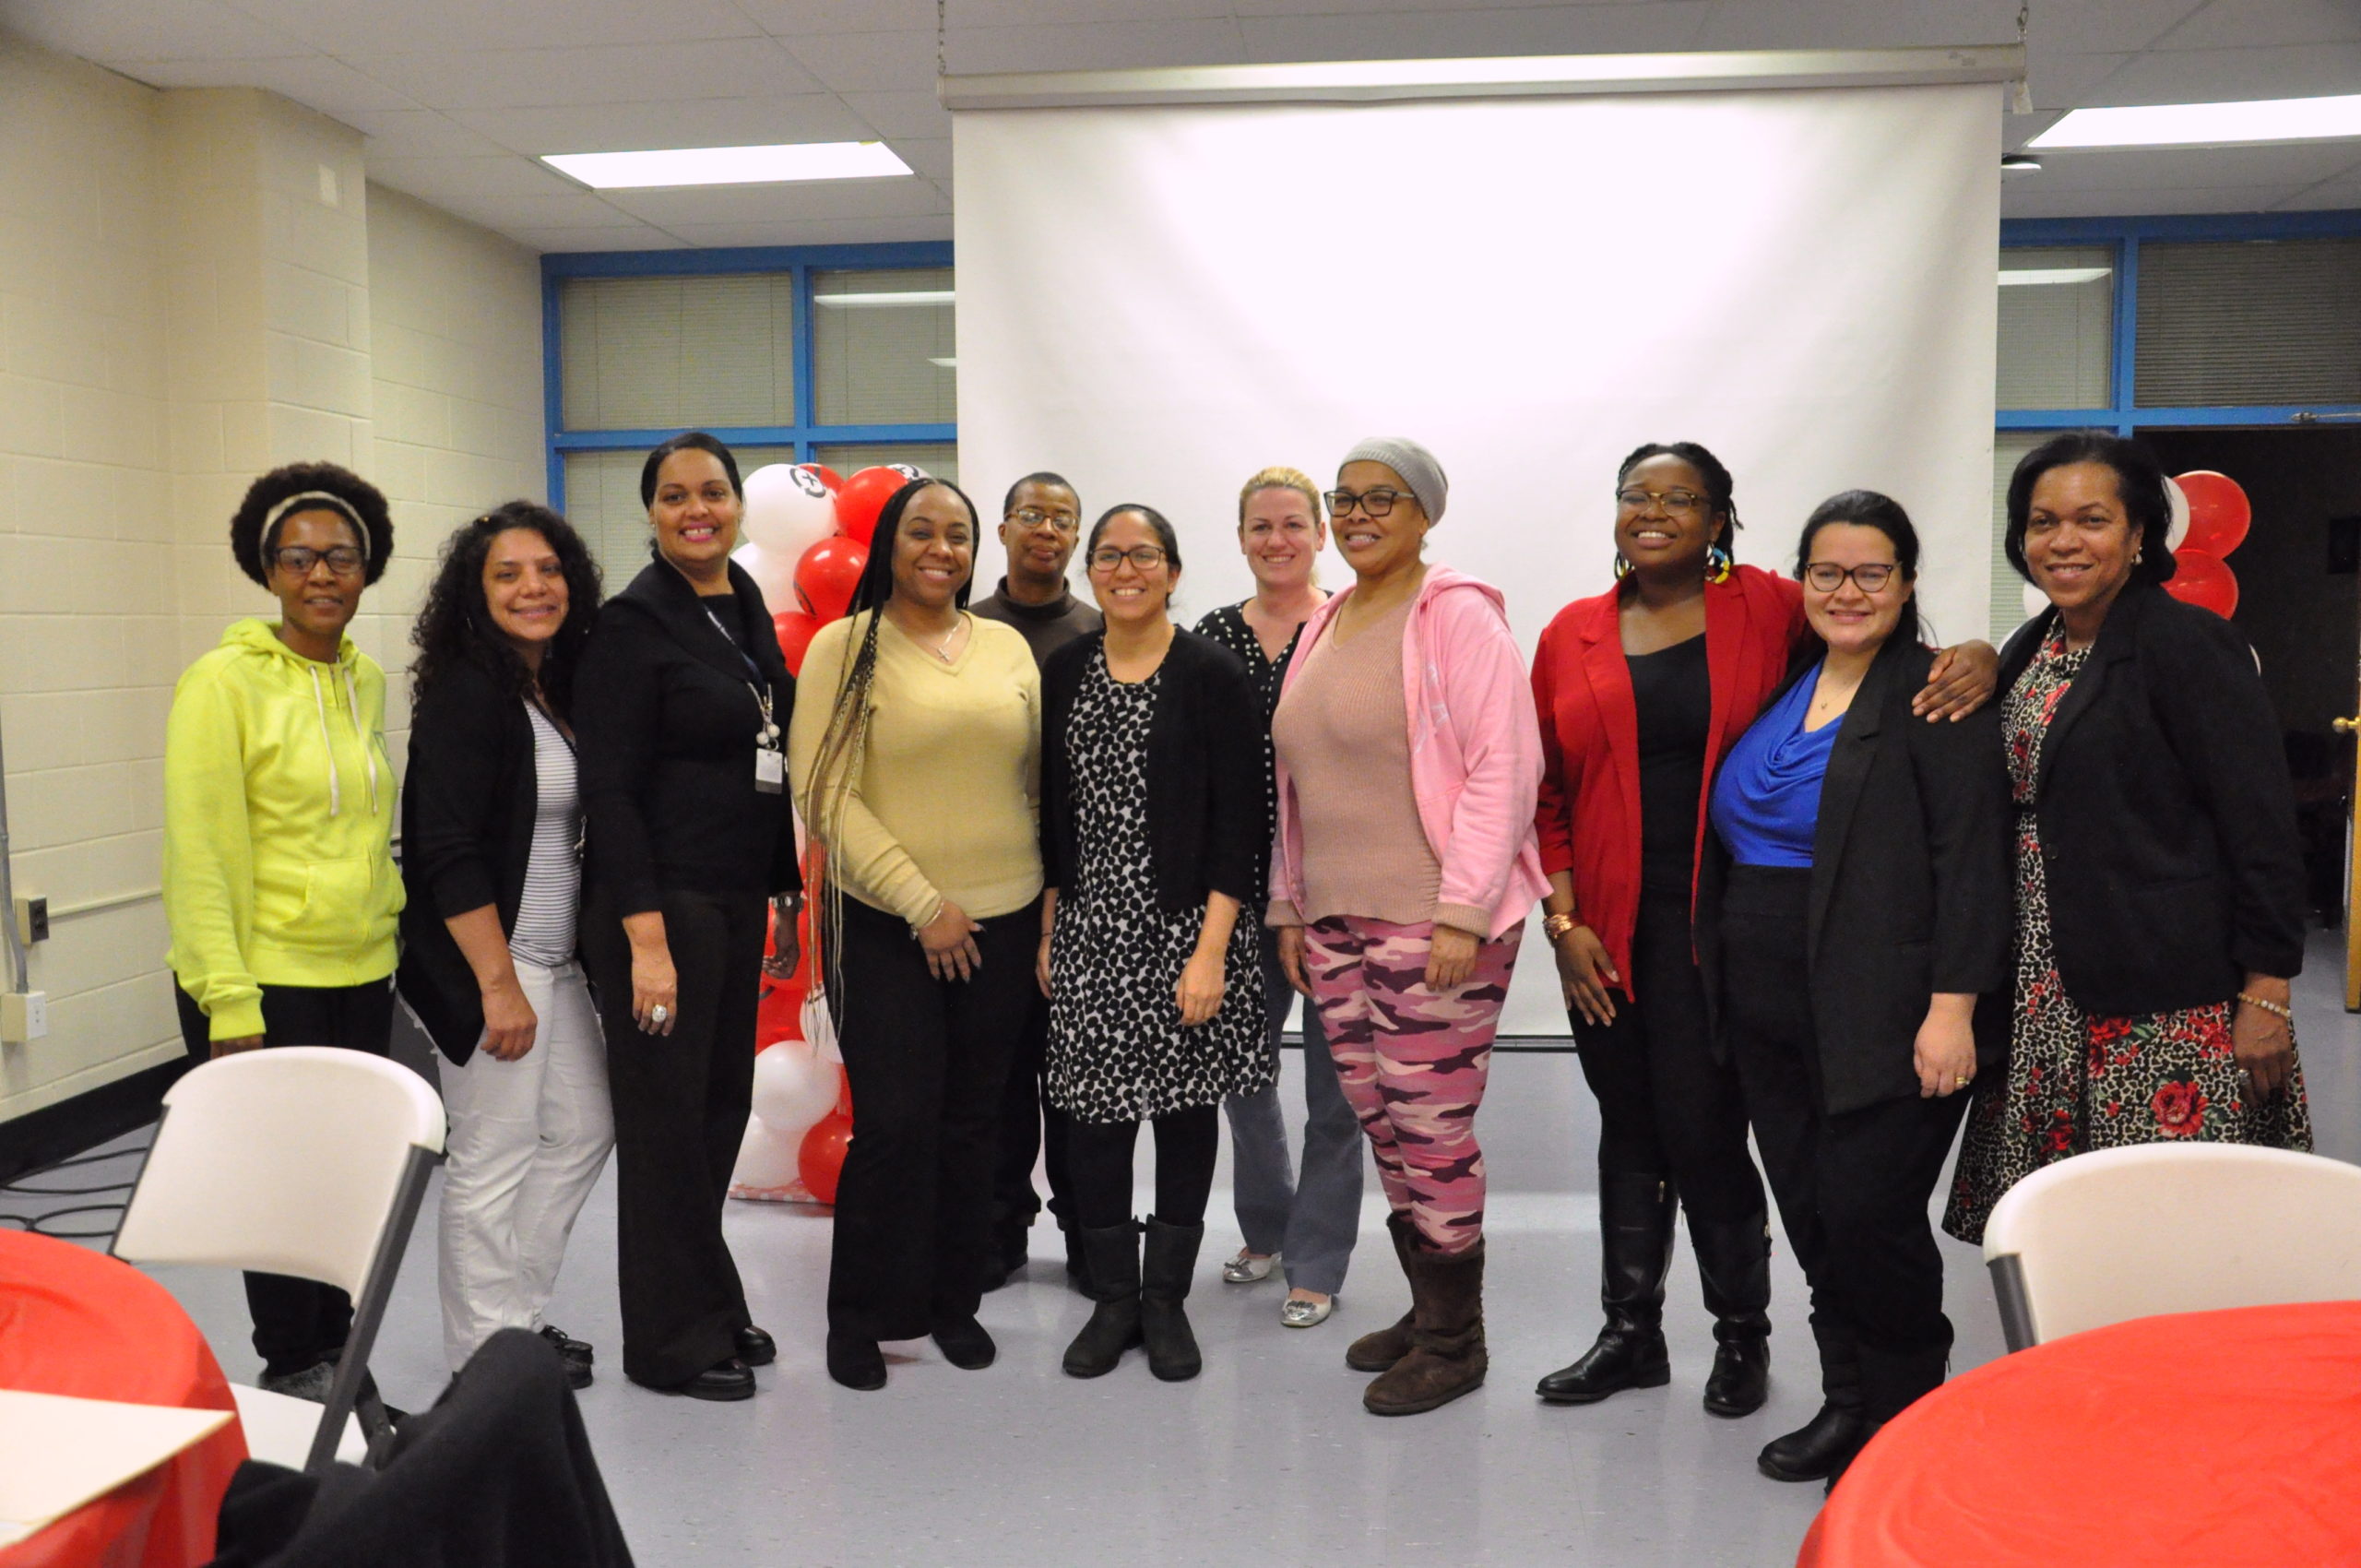 District officials, community members, and Newark parents gathered on Wednesday night at Spencer Miller Community School for the district's latest parent engagement meeting.